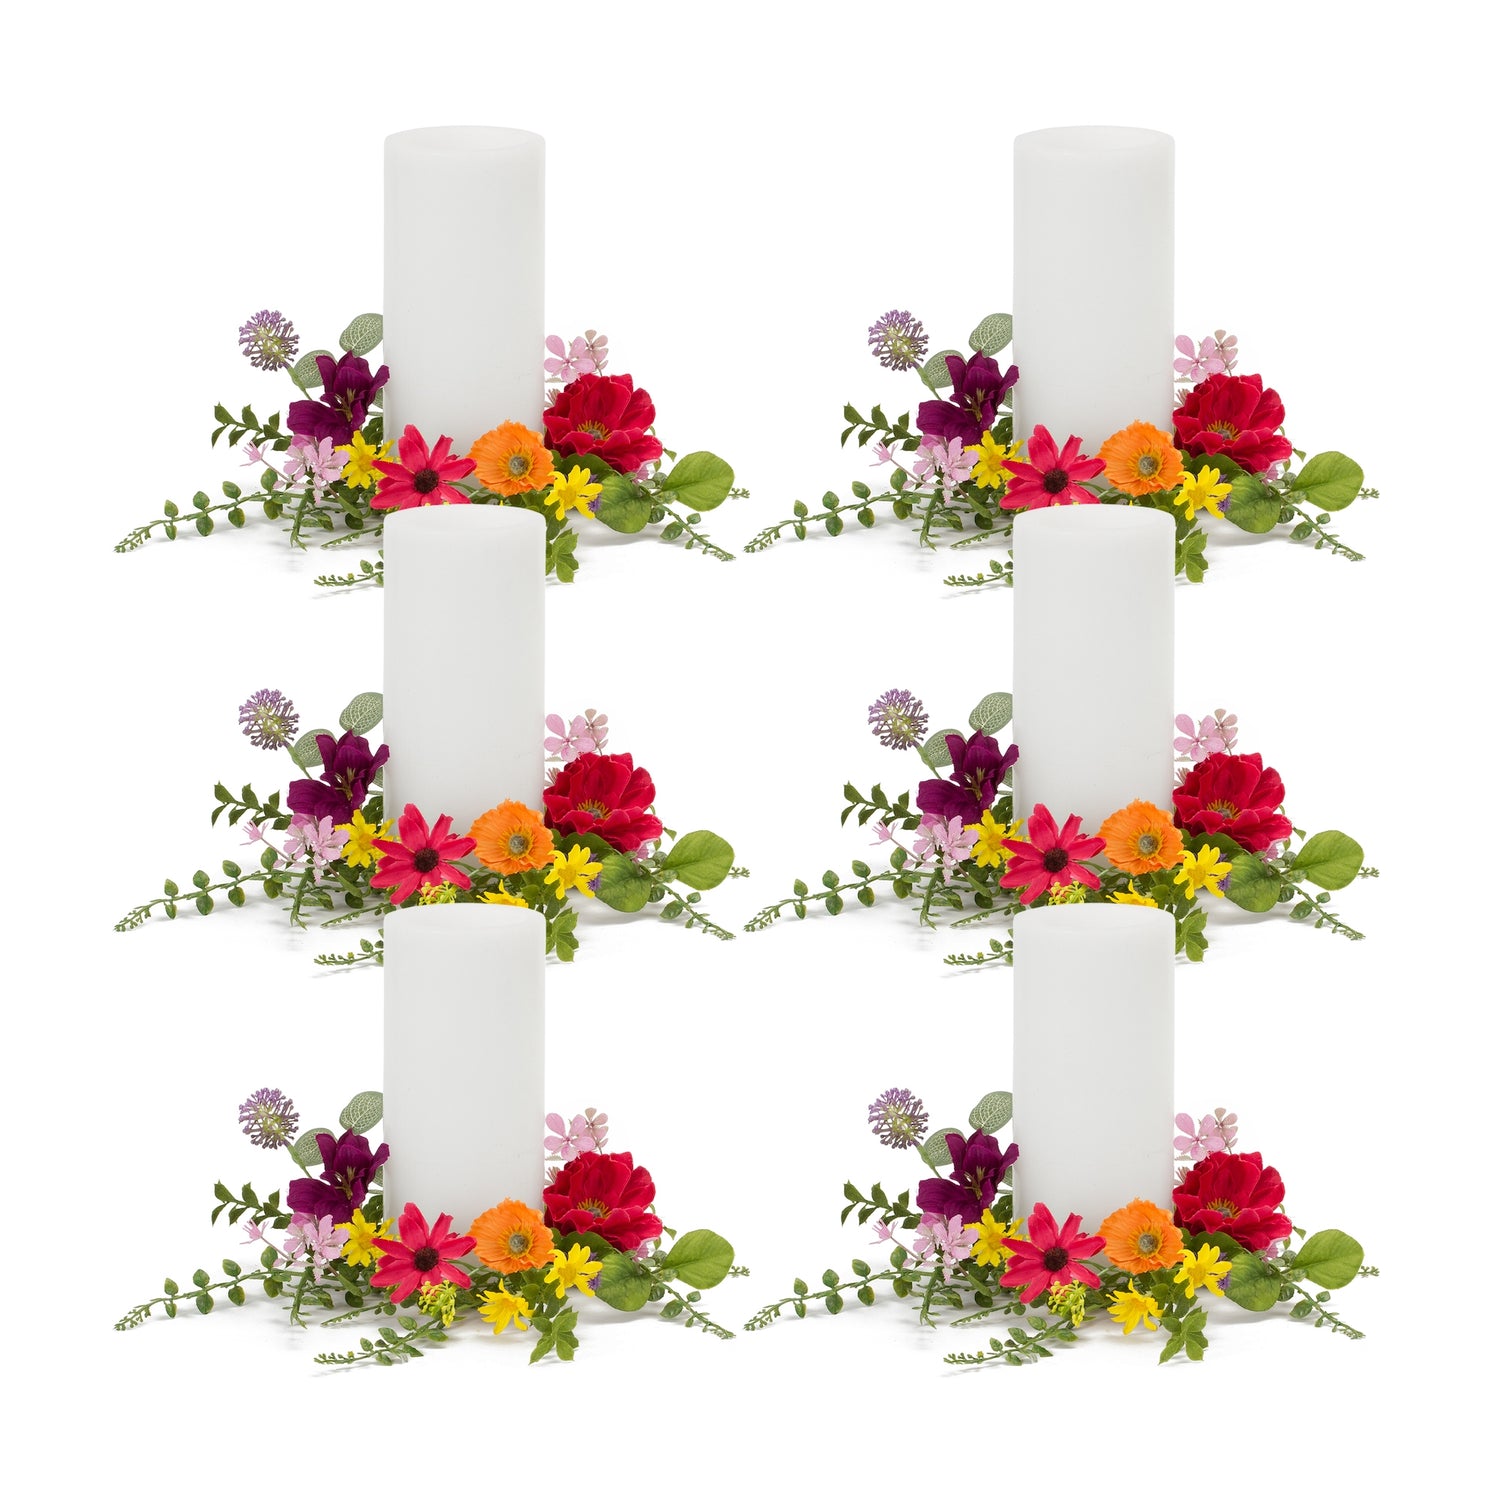 Mixed Floral Candle Ring (Set of 6) 11.5"D Polyester/Plastic (Fits a 4" Candle)